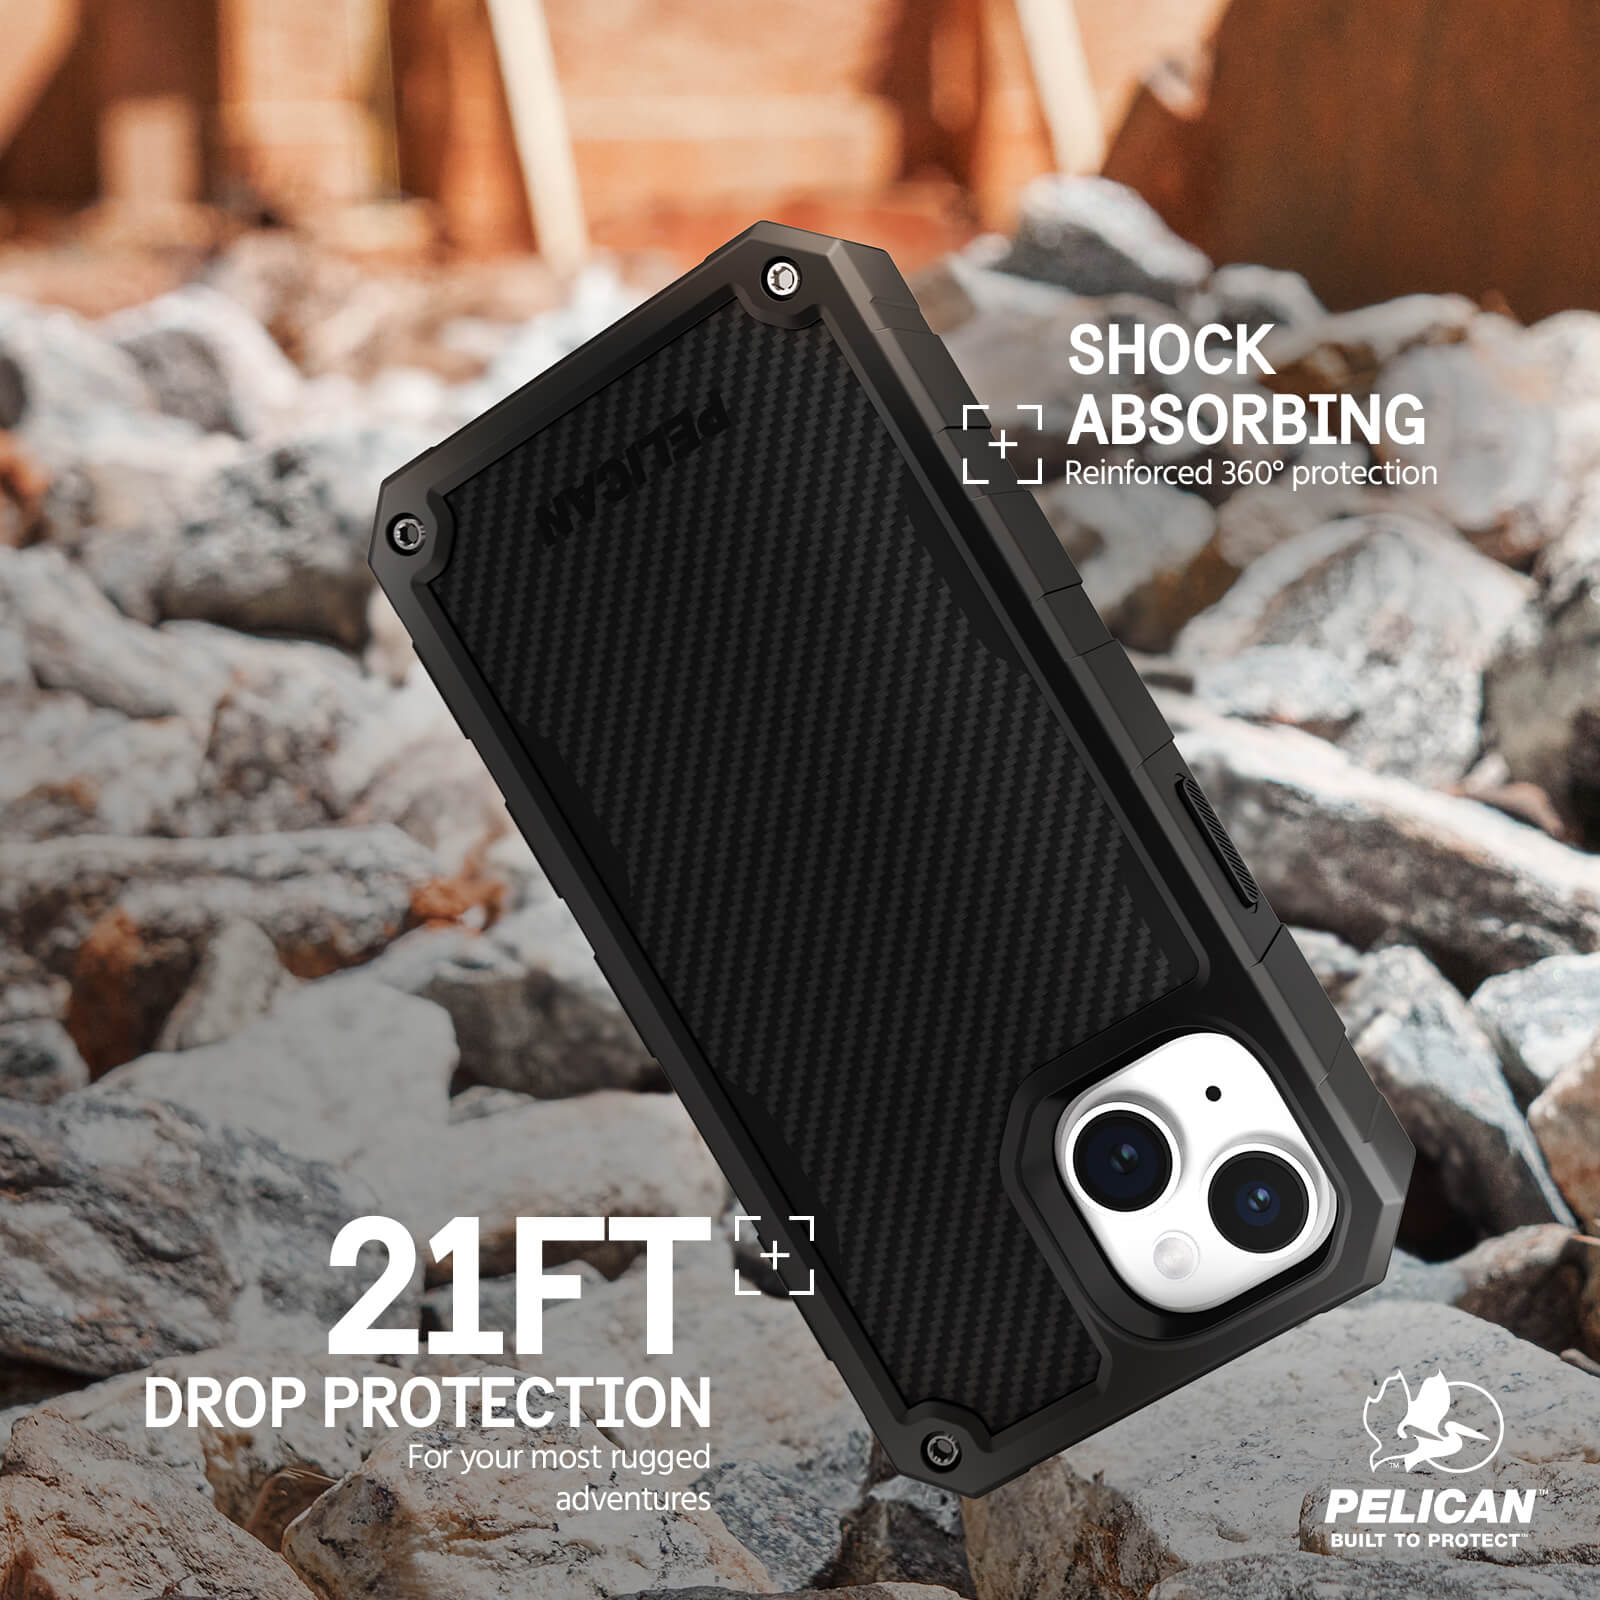 SHOCK ABSORBING REINFORCED 360 DEGREE PROTECTION. 21FT DROP PROTECTION. FOR YOUR MOST RUGGED ADVENTURES.